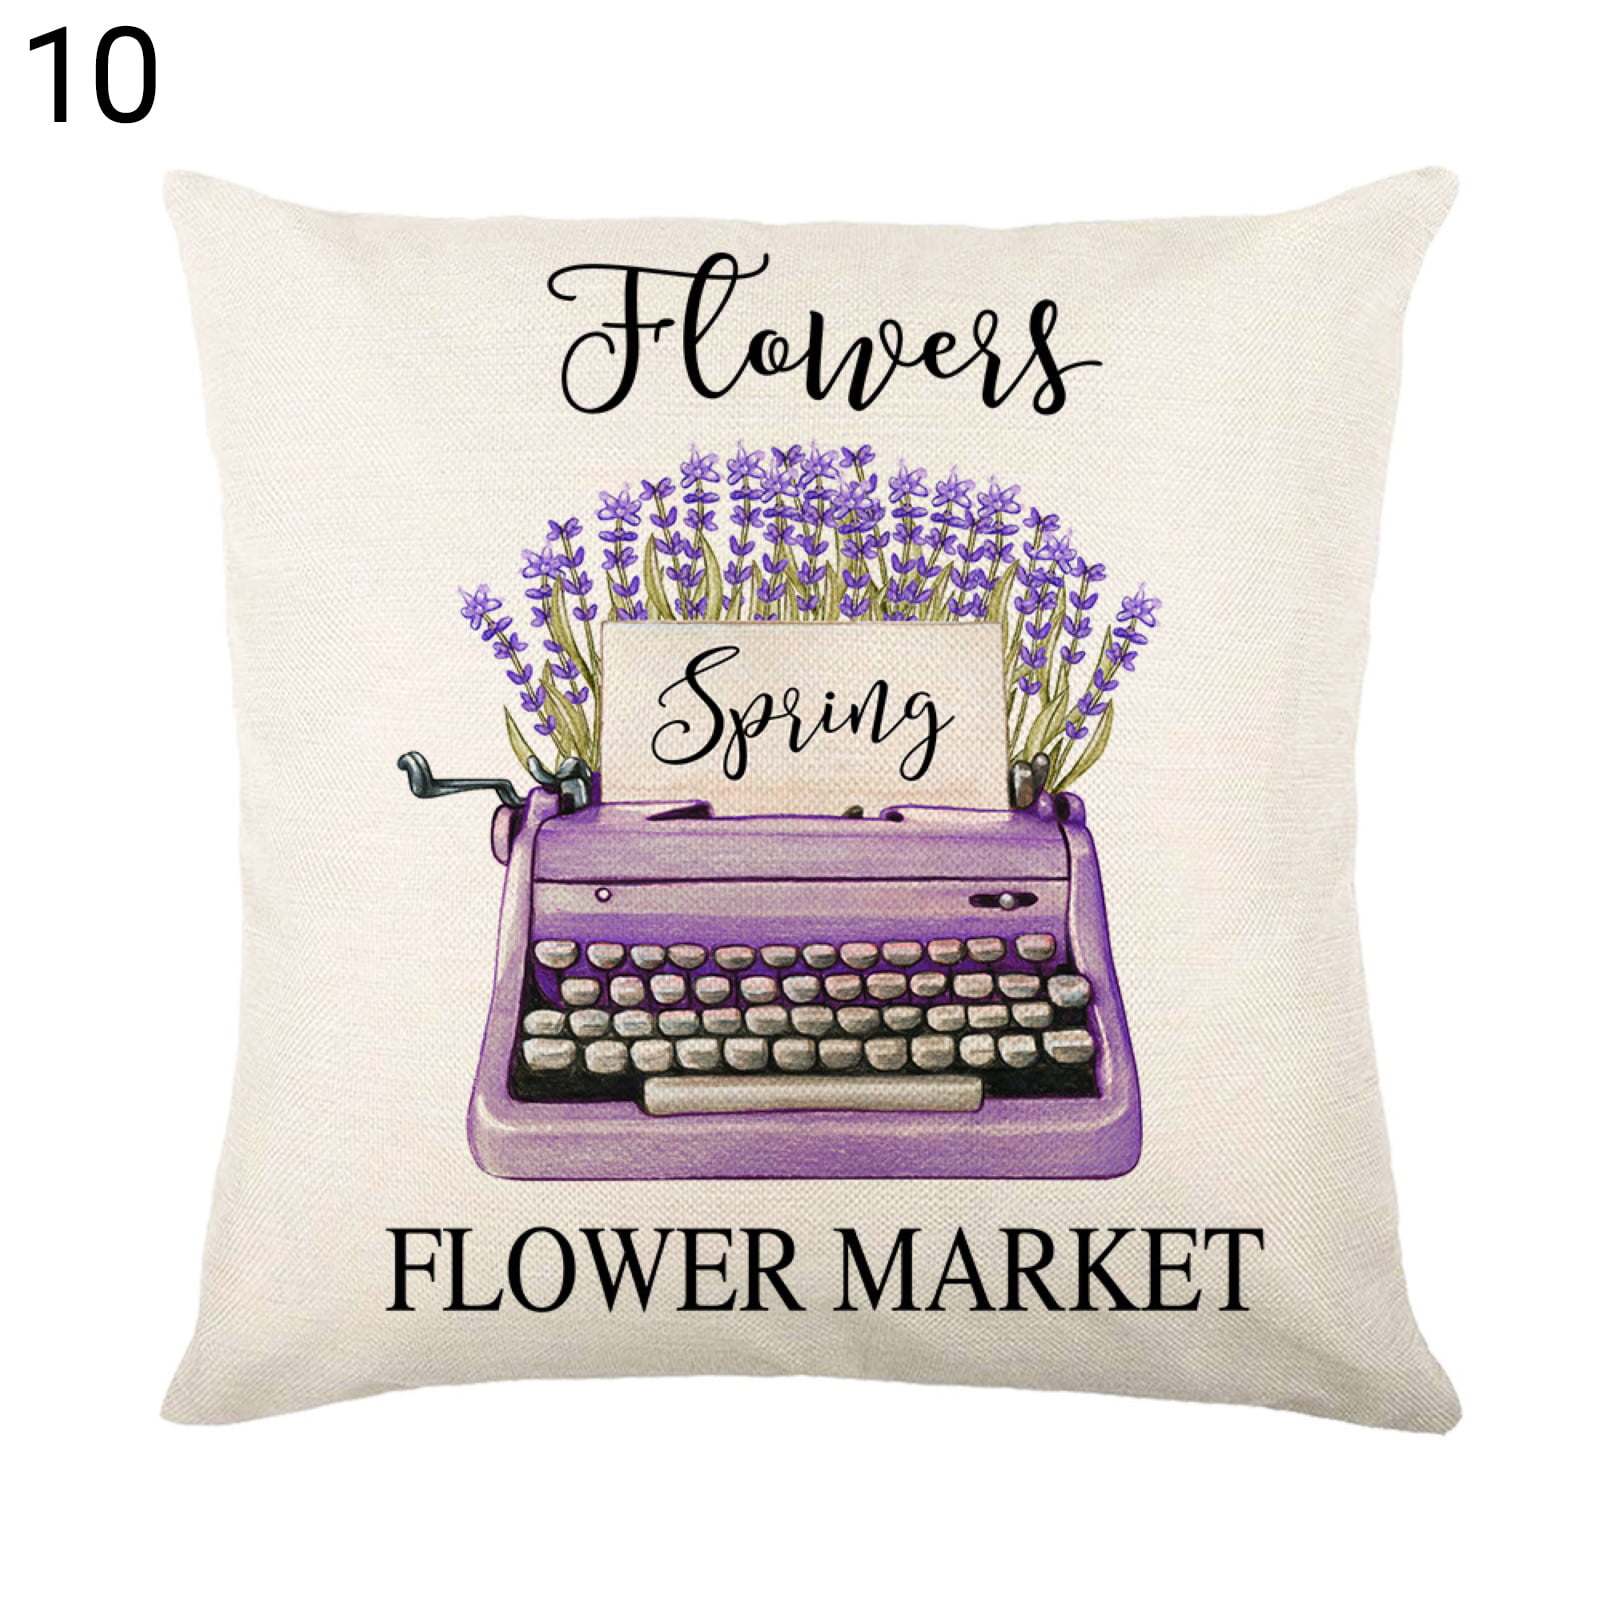 Details about   Modern Floral Print Throw Pillows Case Sofa Waist Cushion Cover Home Bed Decors 